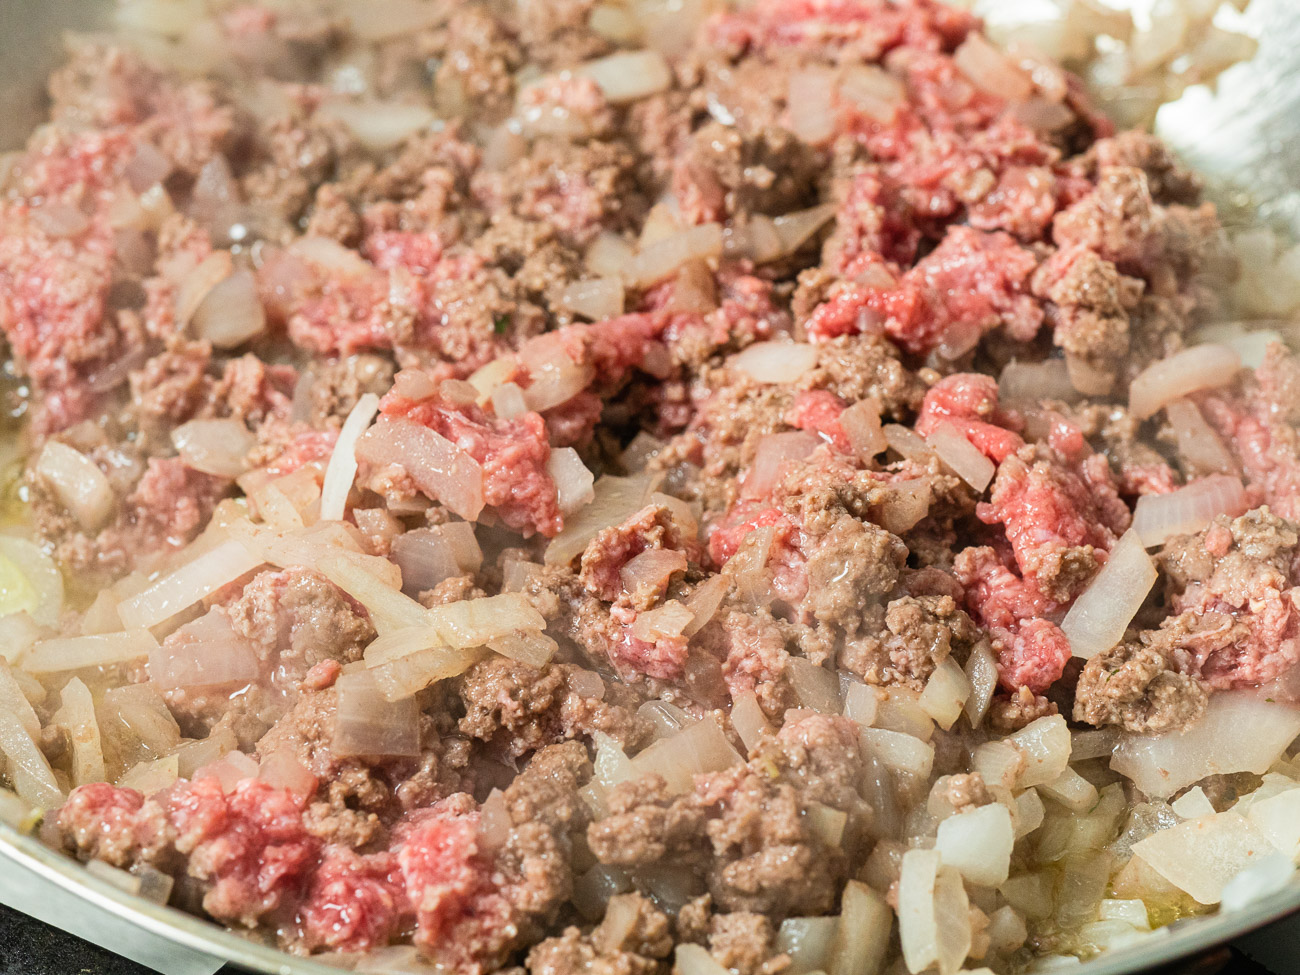 ground beef being browned in a pan